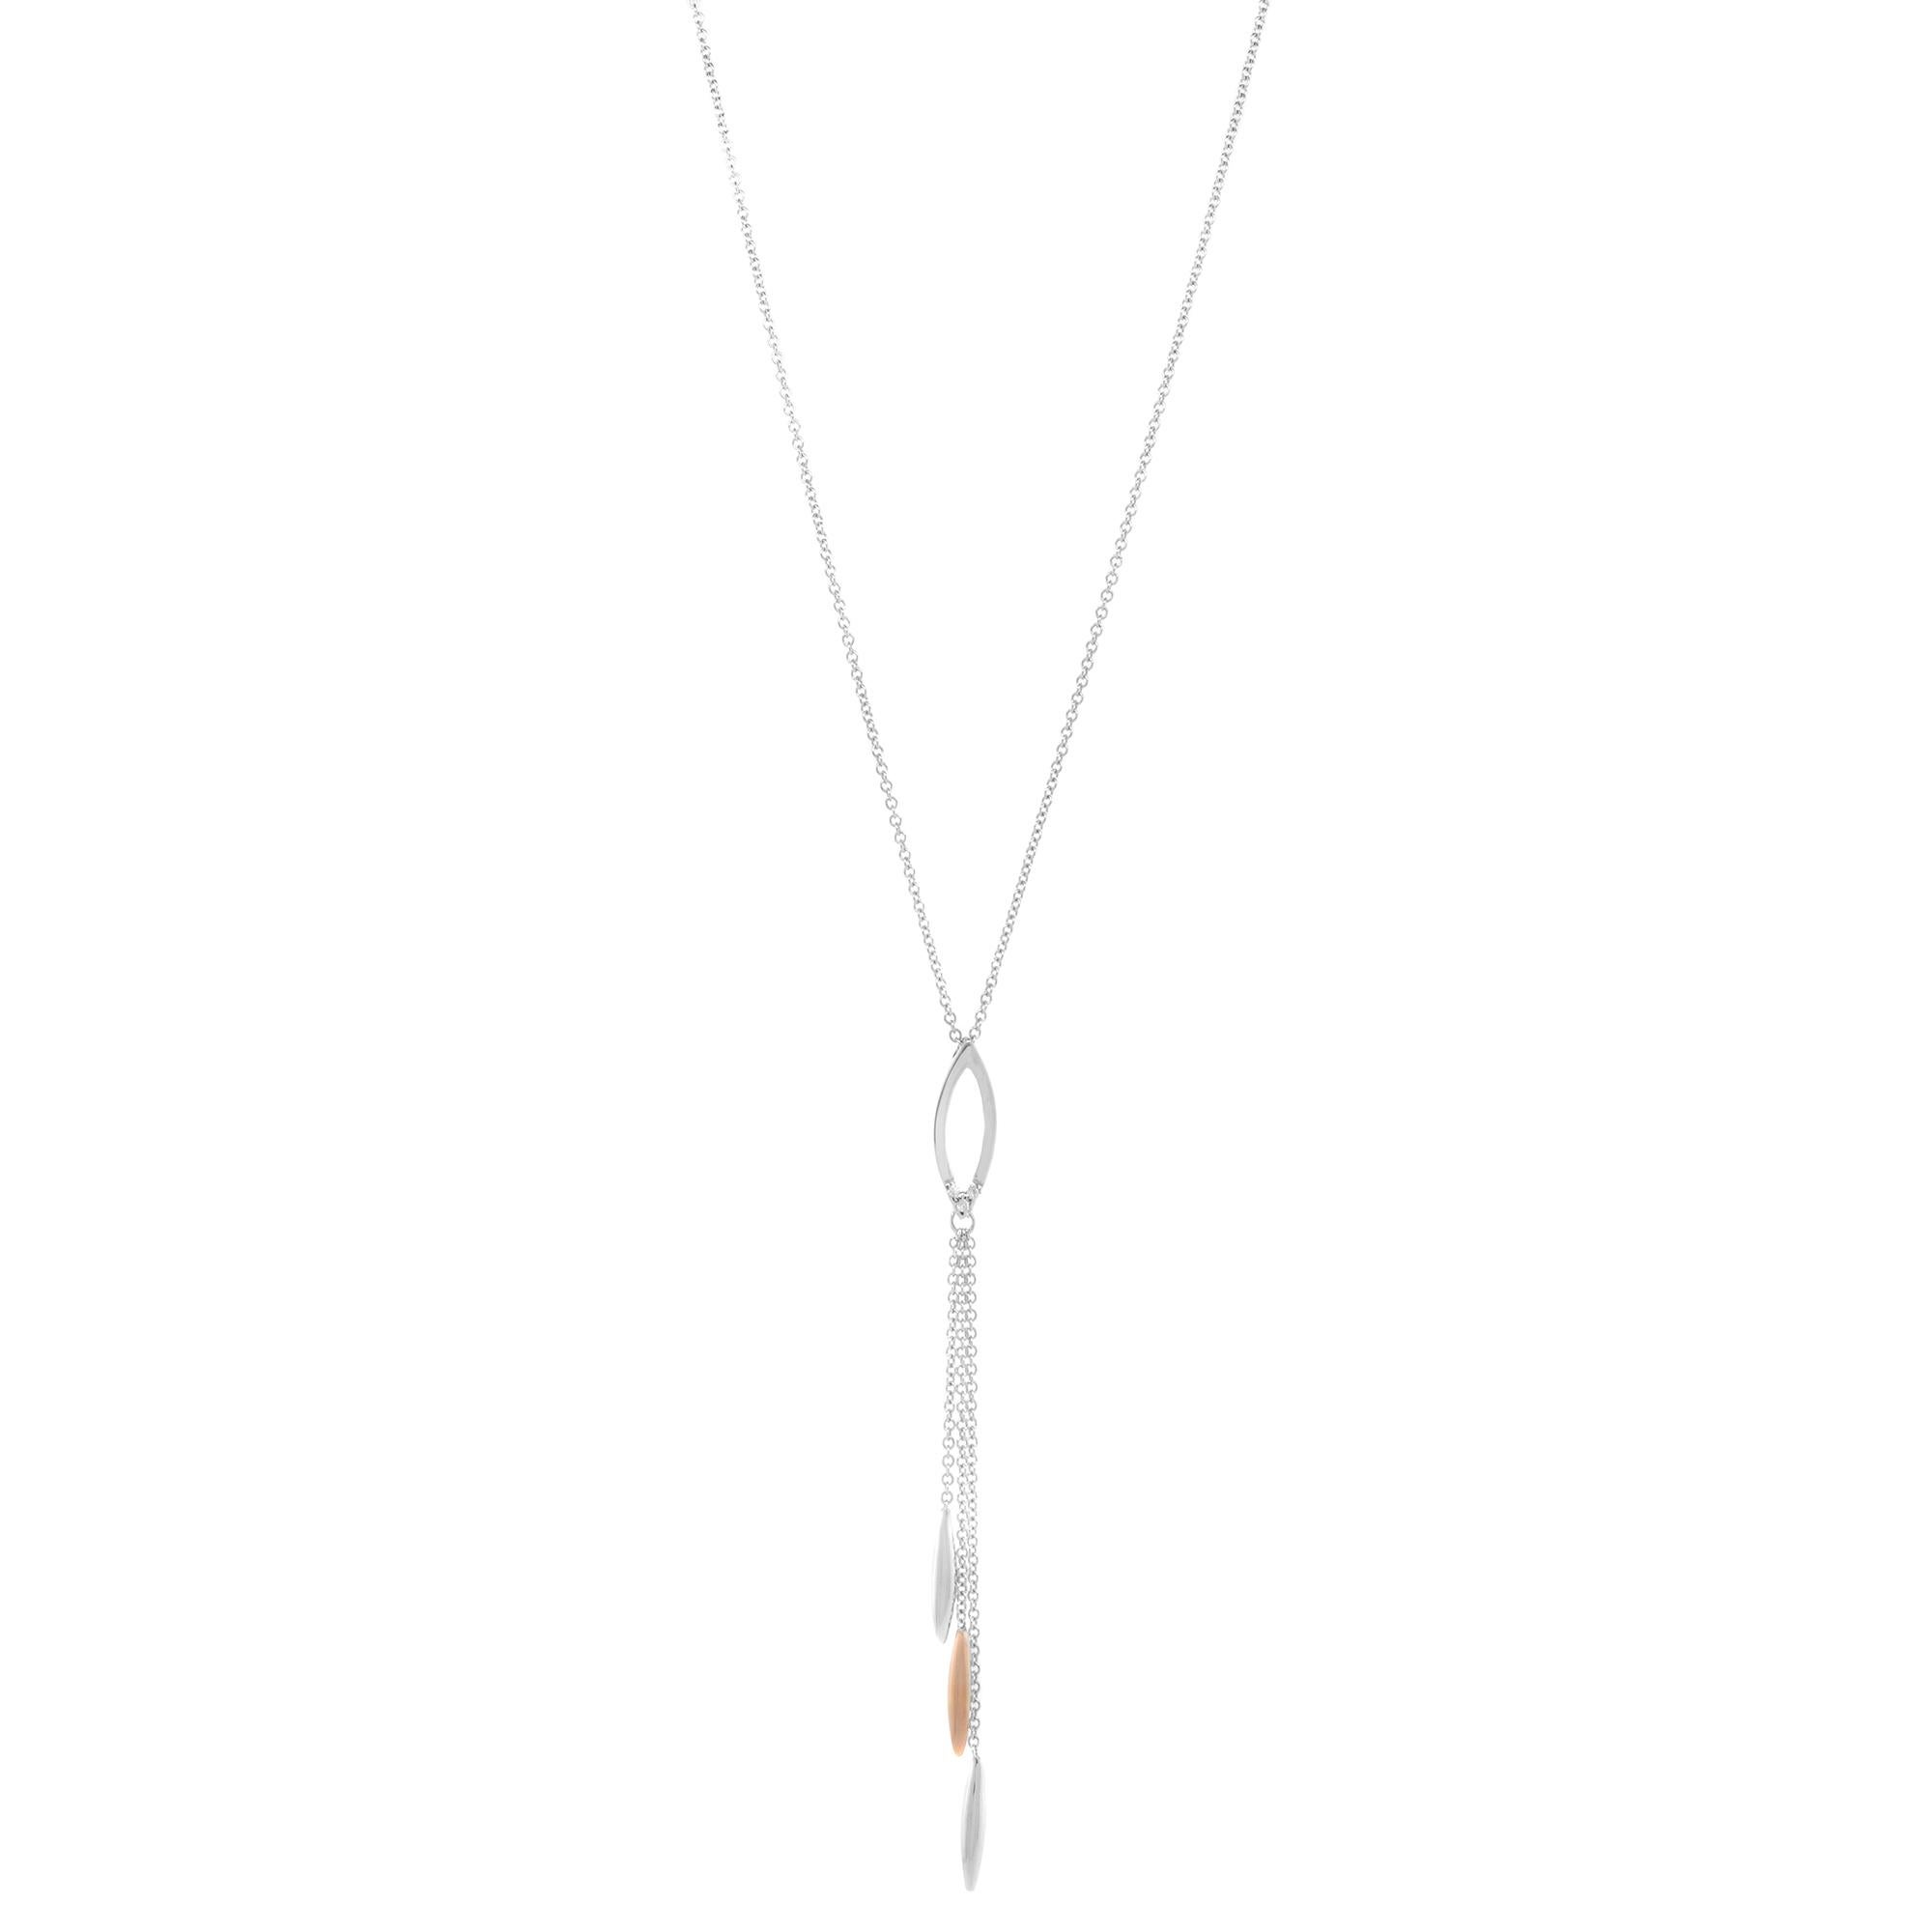 So dainty and pretty that we know it will look wonderful when traveling, going to the beach and having it on tan skin. Beautiful chain pendant necklace crafted in 18k white and yellow gold. Chain length: 16 inches. Motif length: 2.5 inches. Weight: